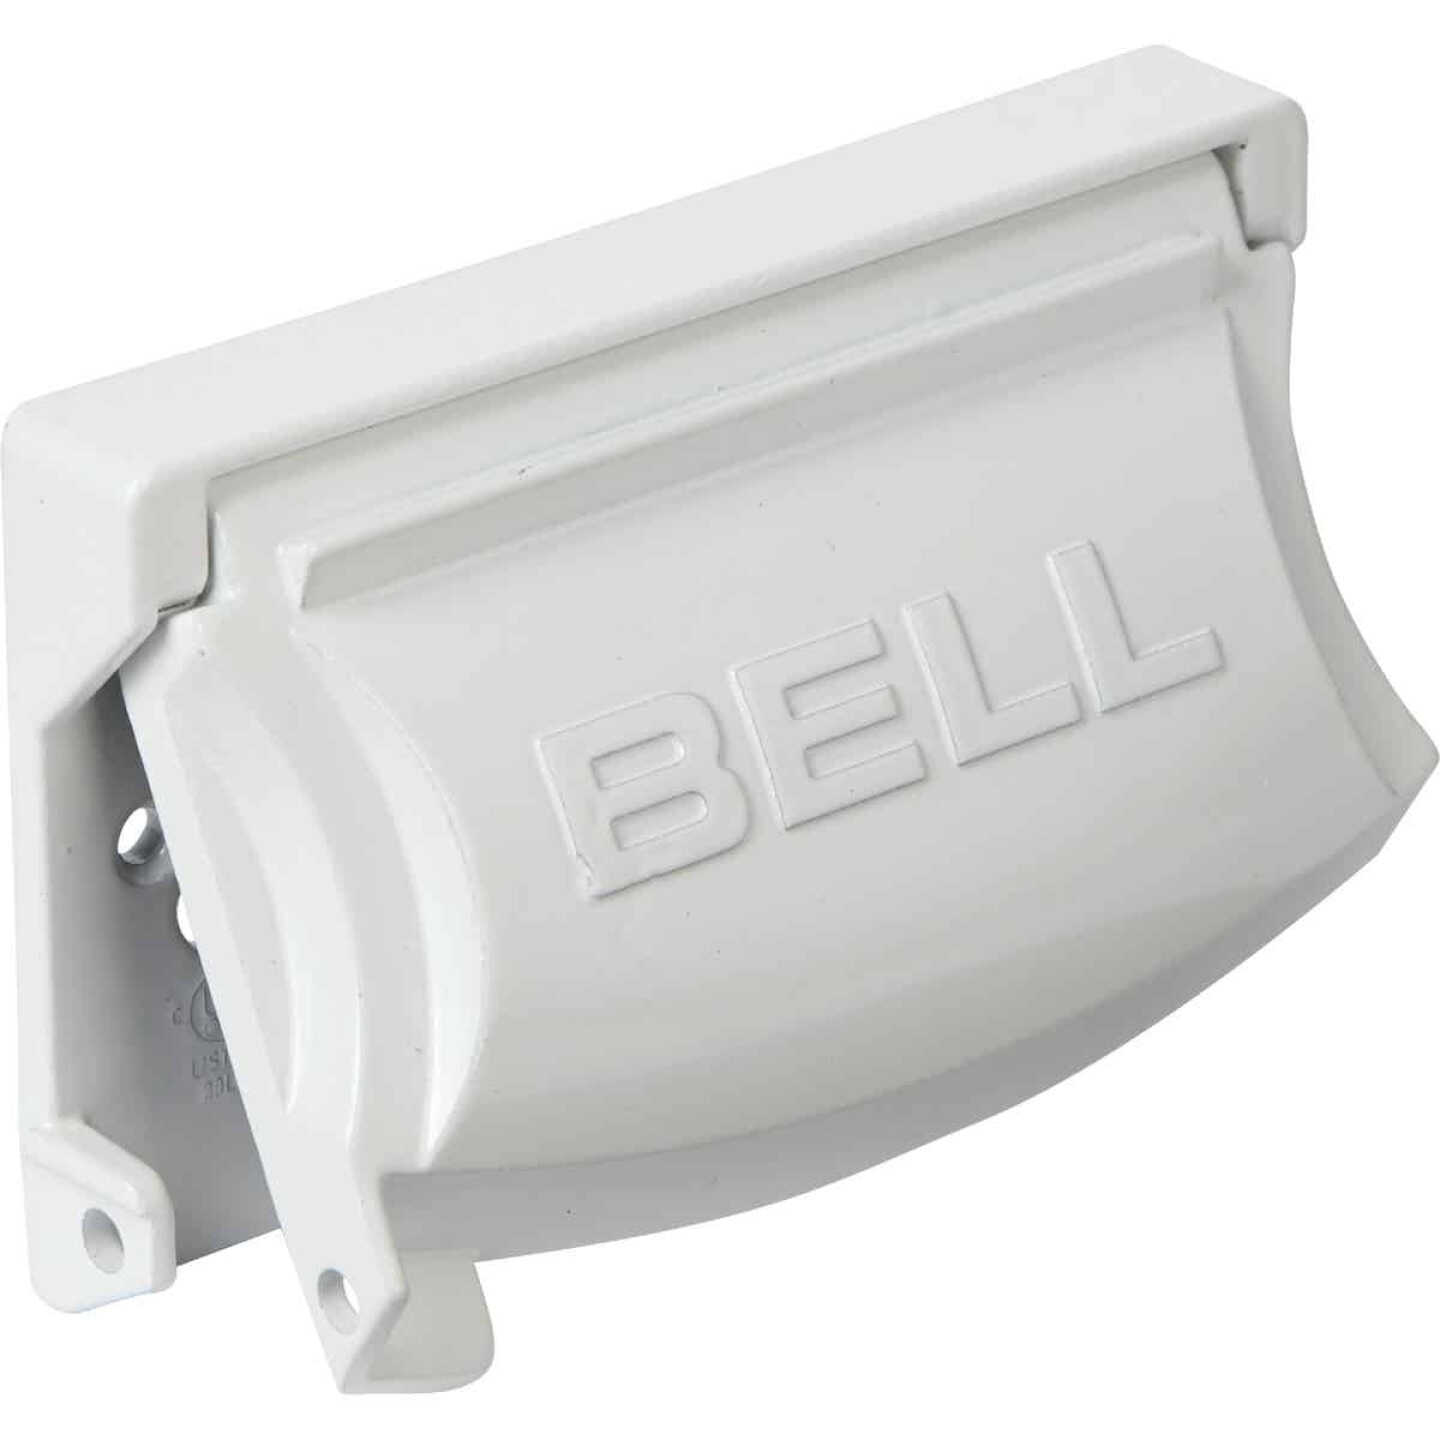  Bell MX1250S Weatherproof Single Outlet Cover Outdoor